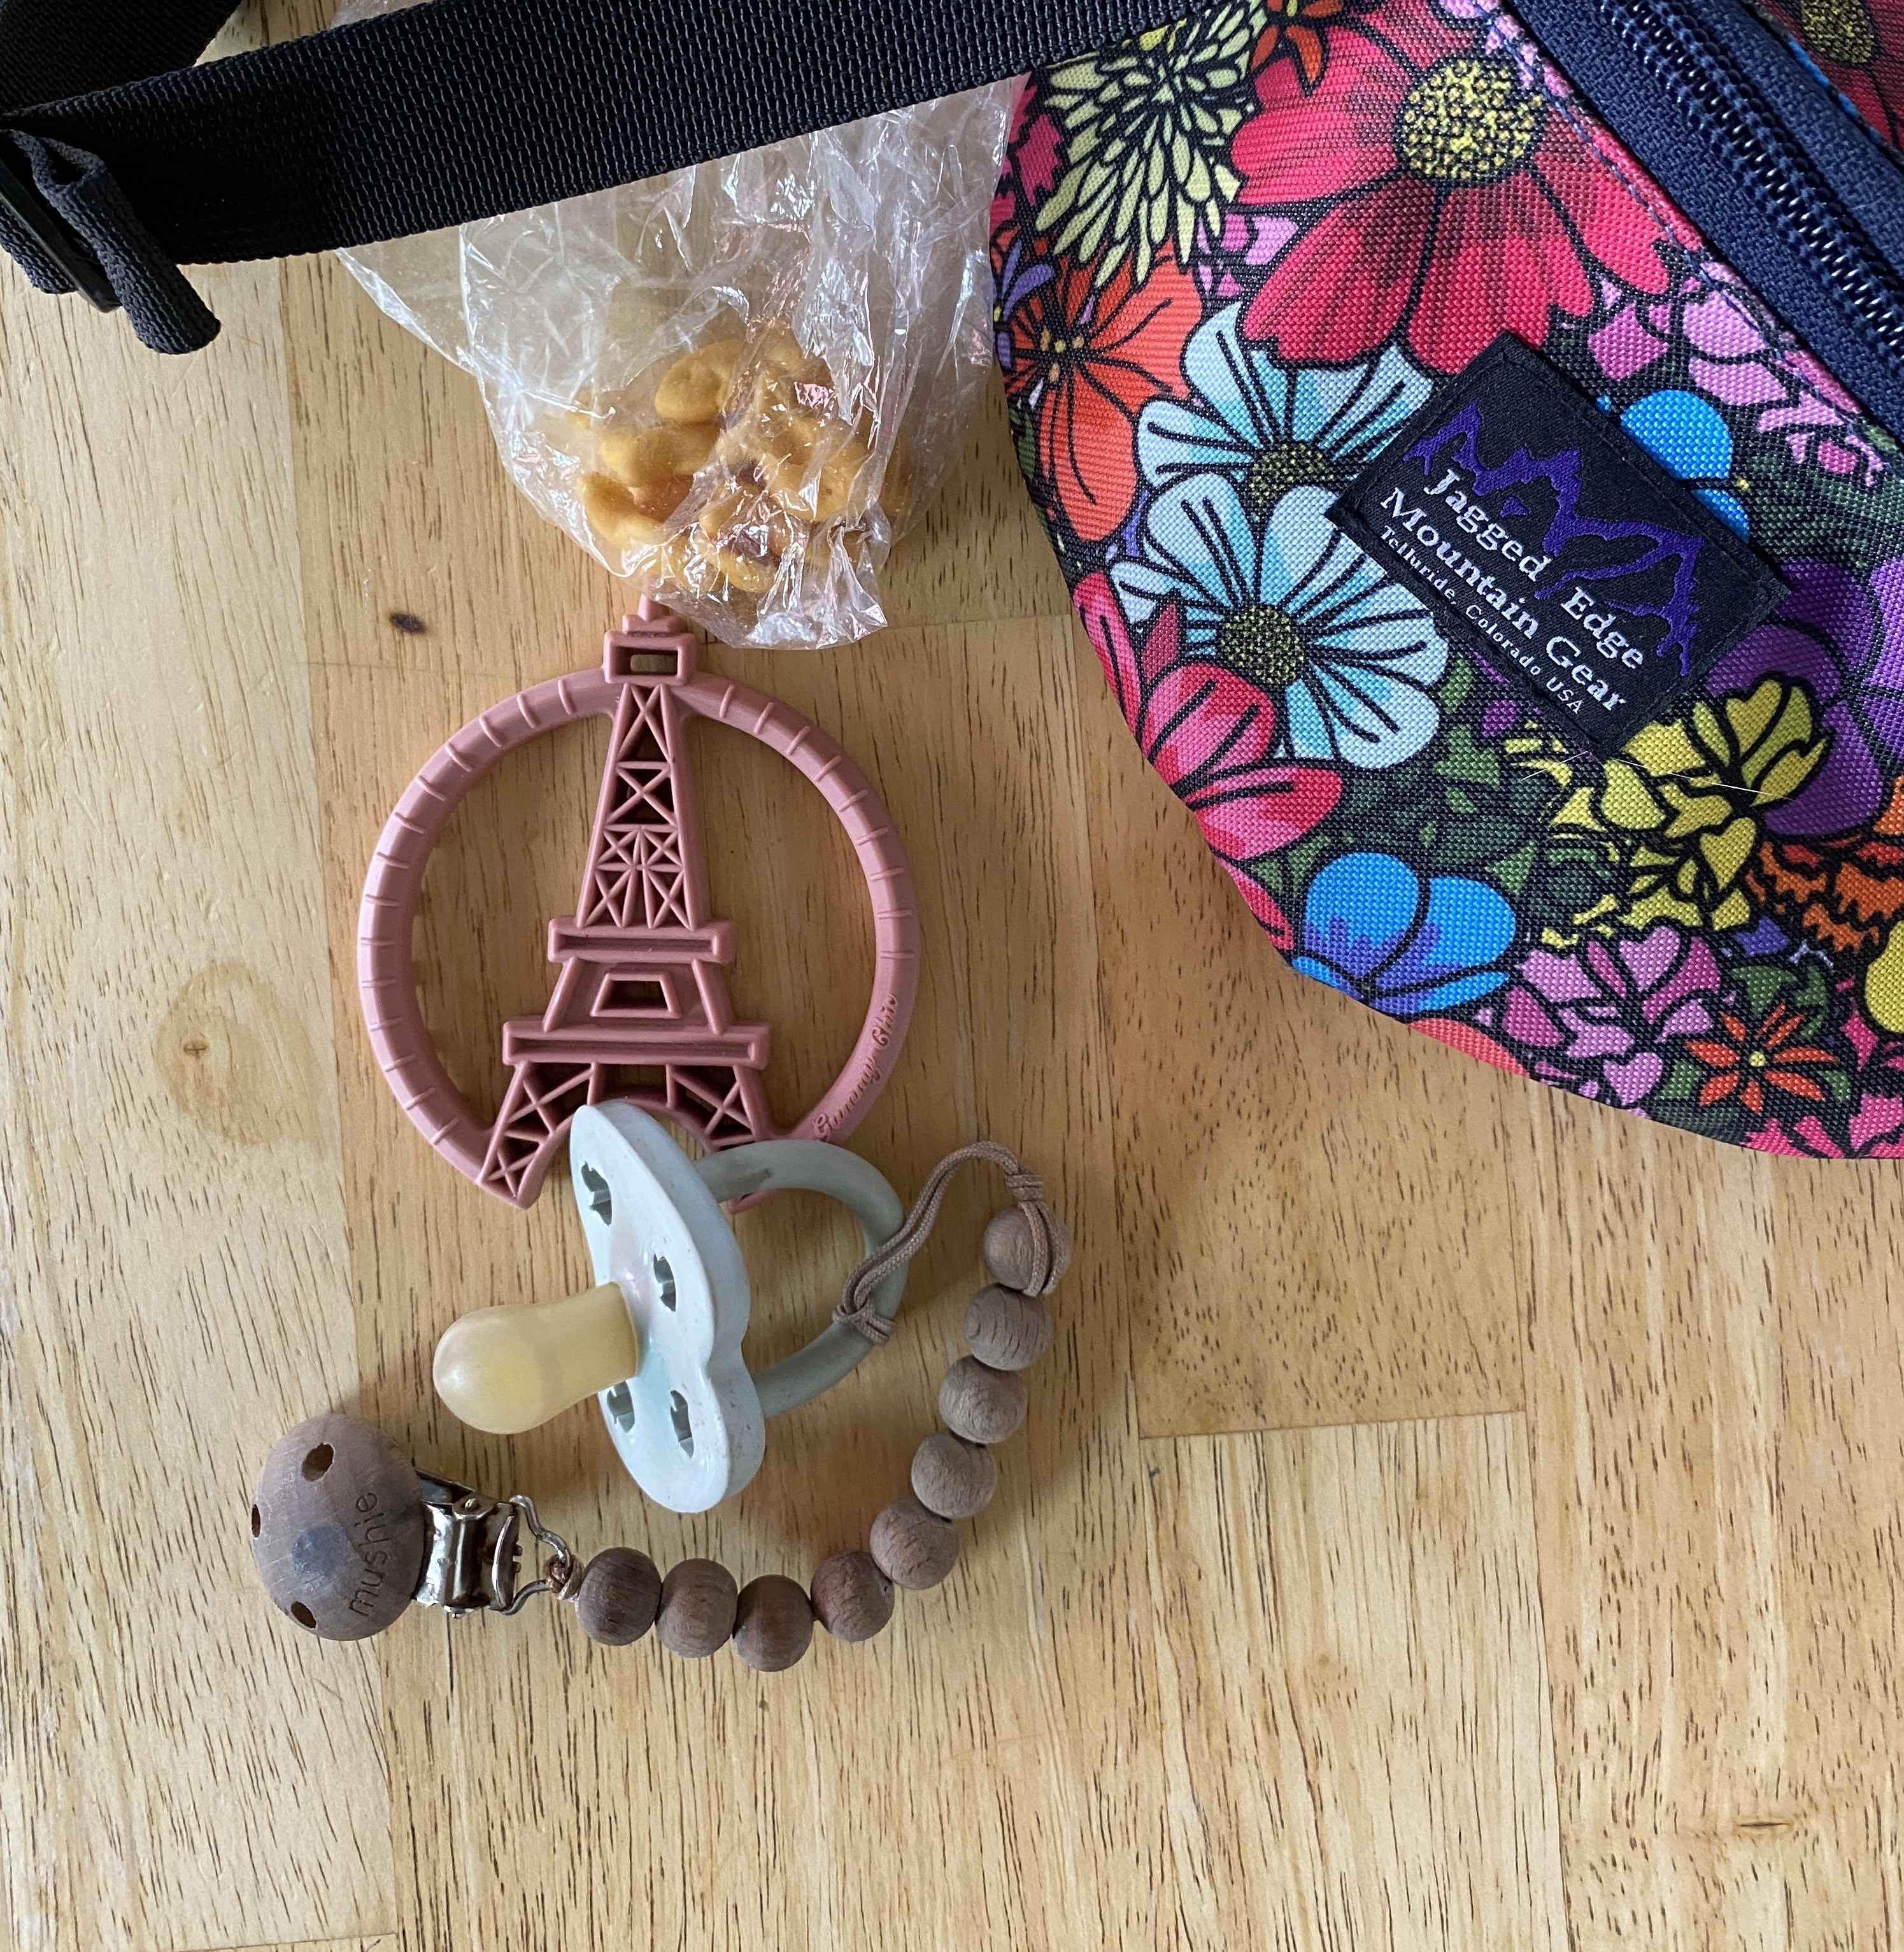 Bag with small baby items